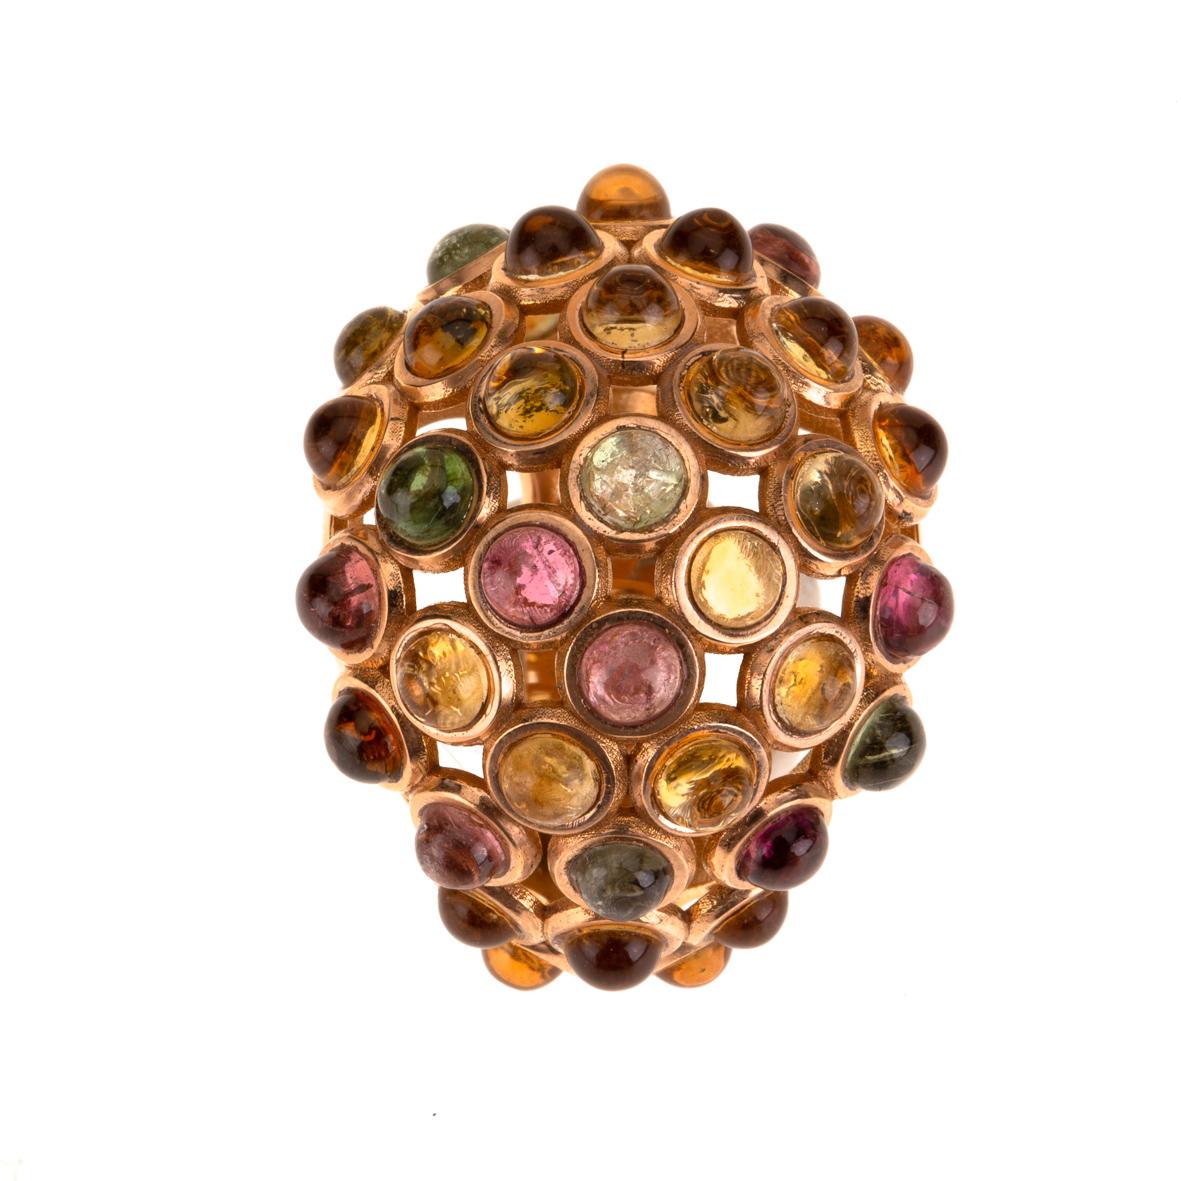 !8 kt rose gold gr. 21 Cabochon tourmaline different color cts 12,90, measure 13 eu. Made in Italy all made by hand.
All Giulia Colussi jewelry is new and has never been previously owned or worn. Each item will arrive at your door beautifully gift